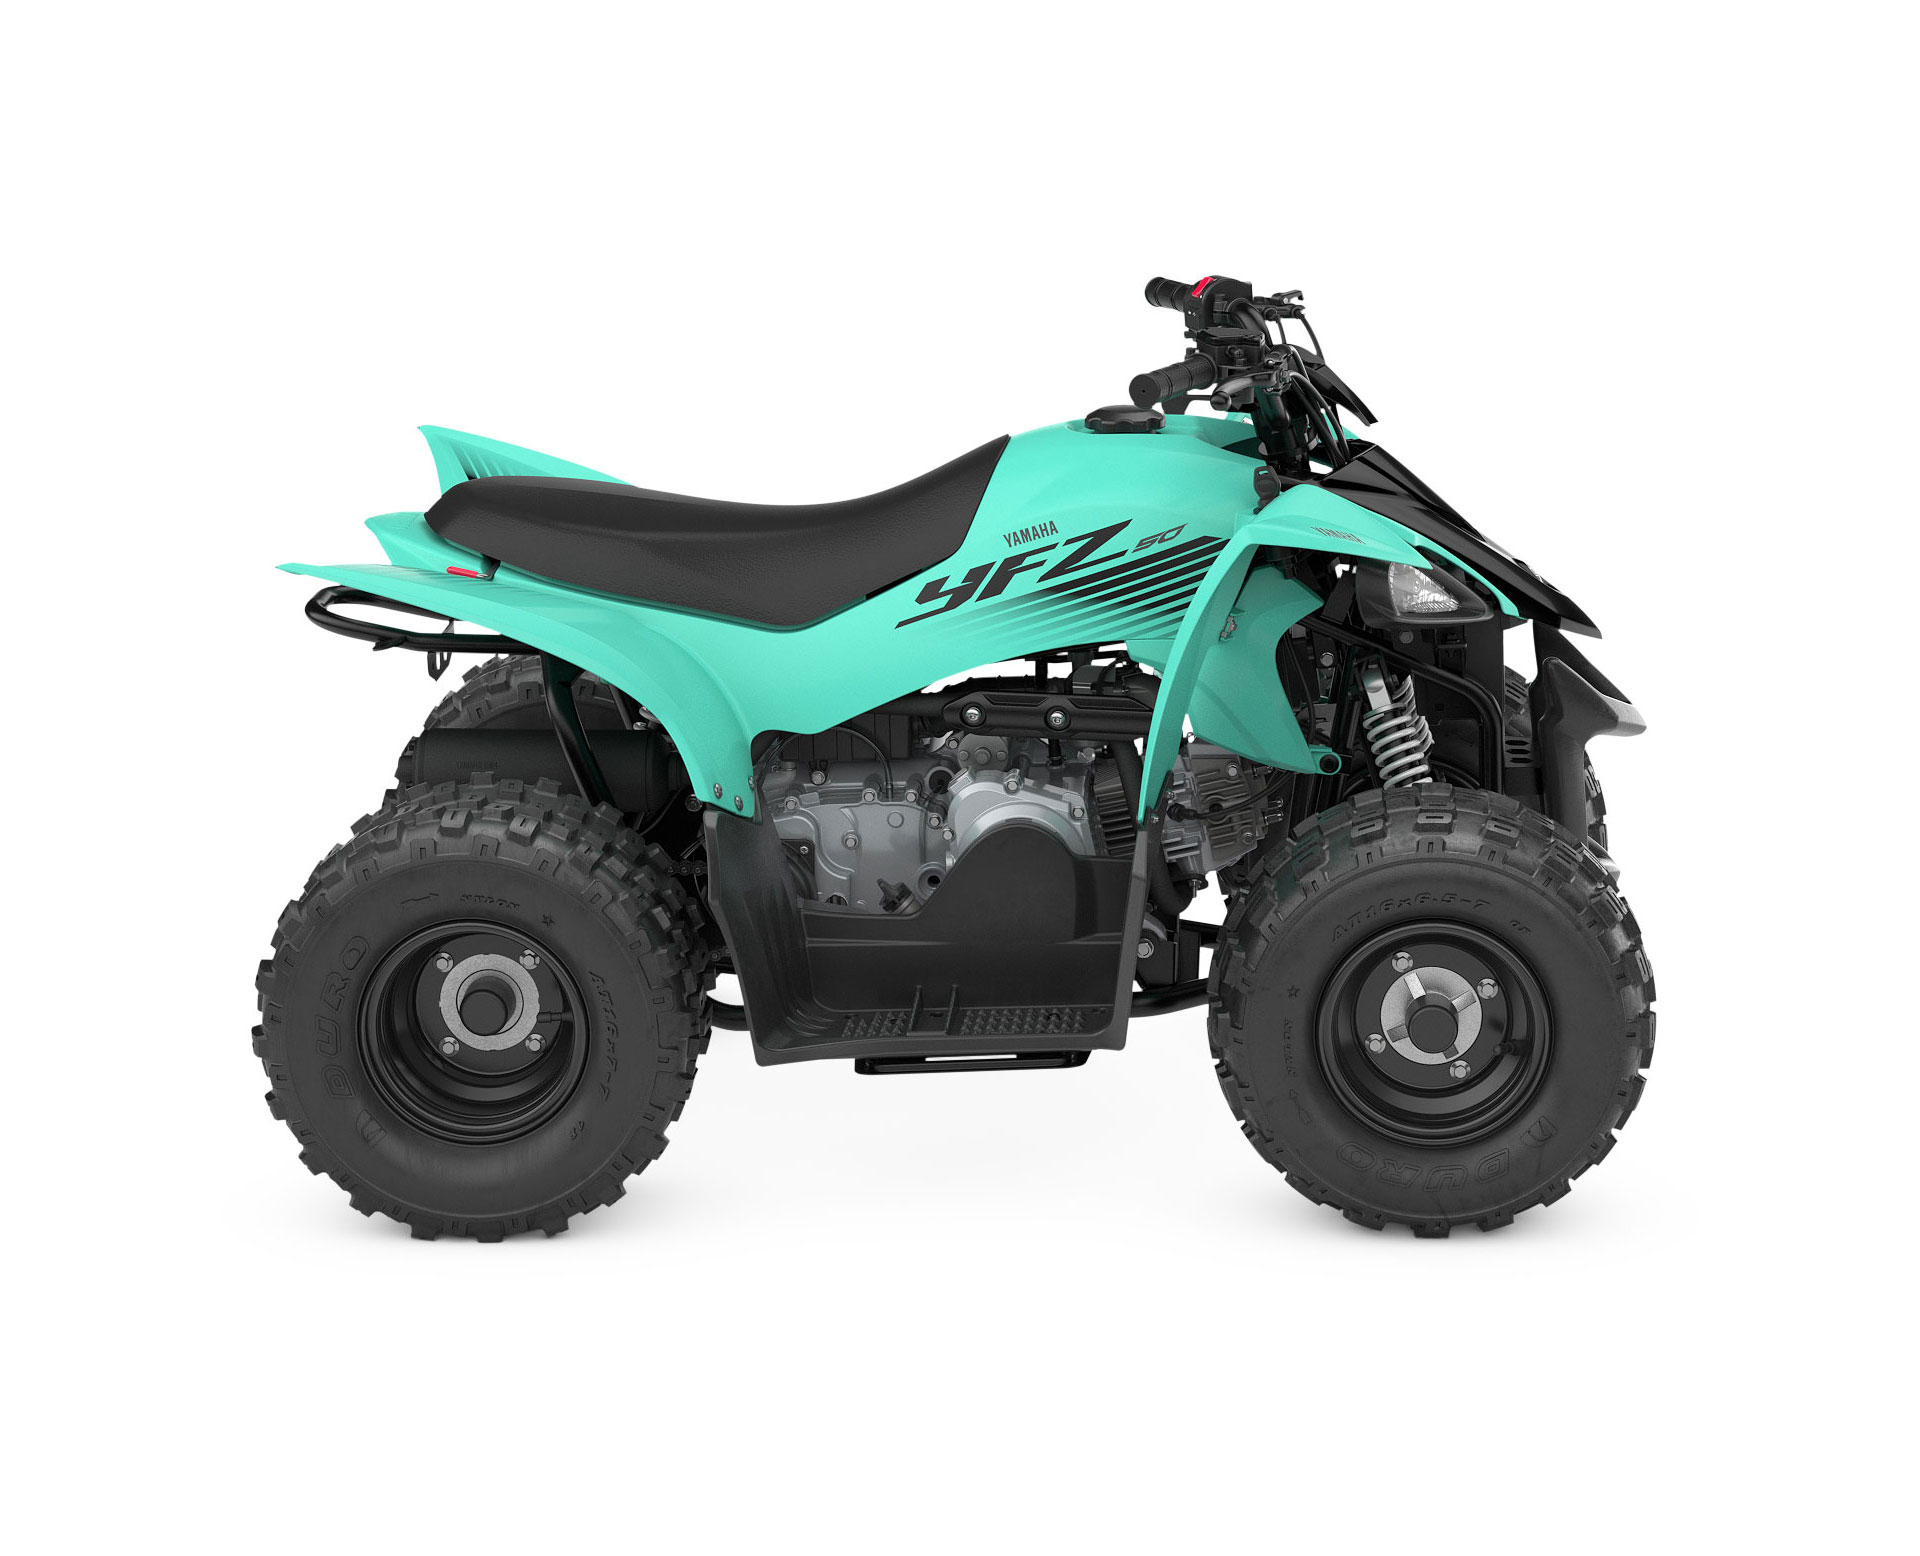 Thumbnail of your customized YFZ50 2024